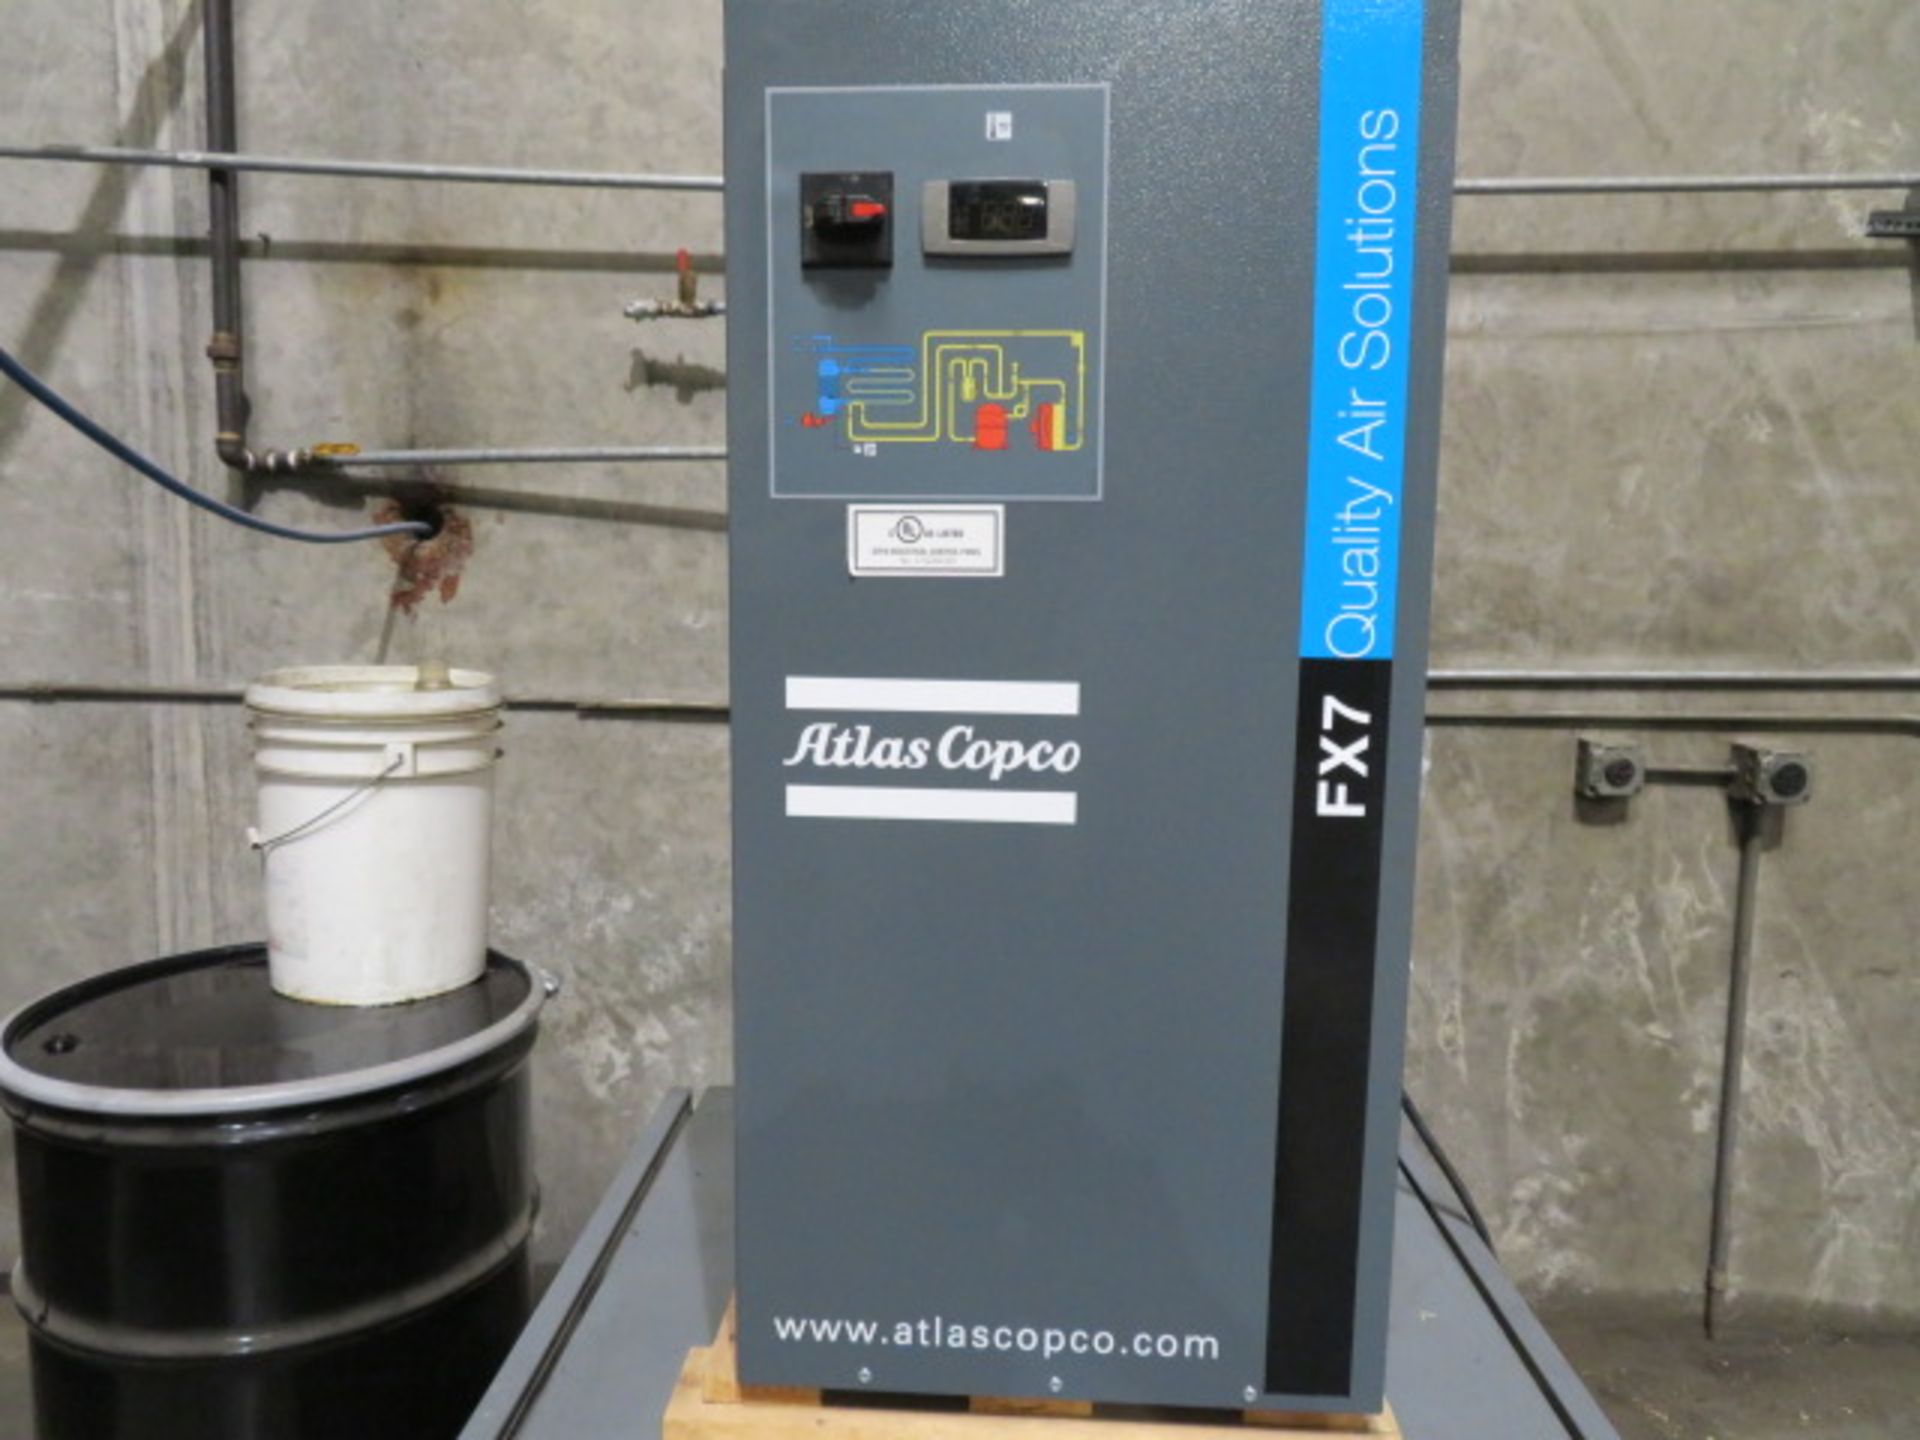 REFRIGERATED AIR DRYER, ATLAS COPCO MDL. FX7 NEW 2019